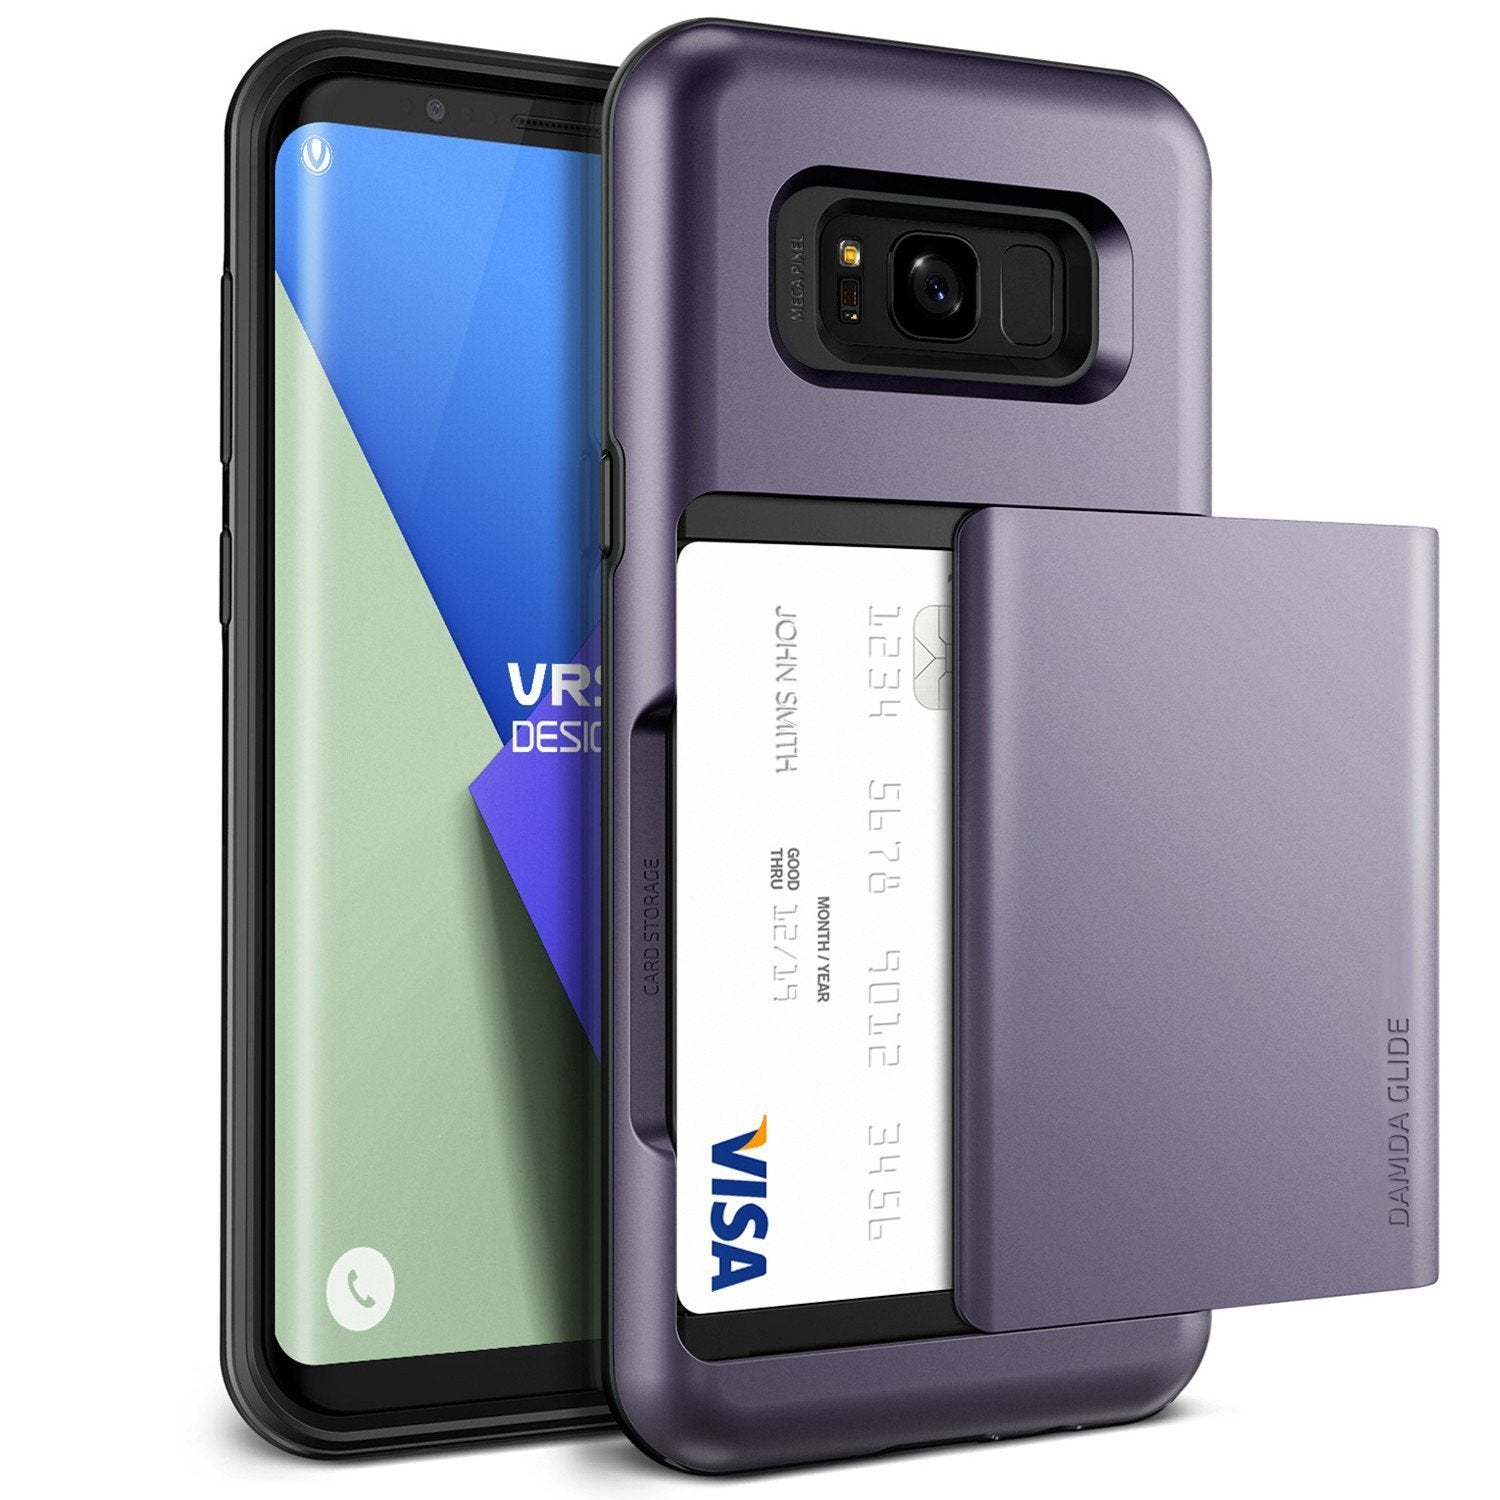 Samsung Galaxy S8 wallet rugged case with multiple durable and convenient card slot with sleek minimalism by VRS